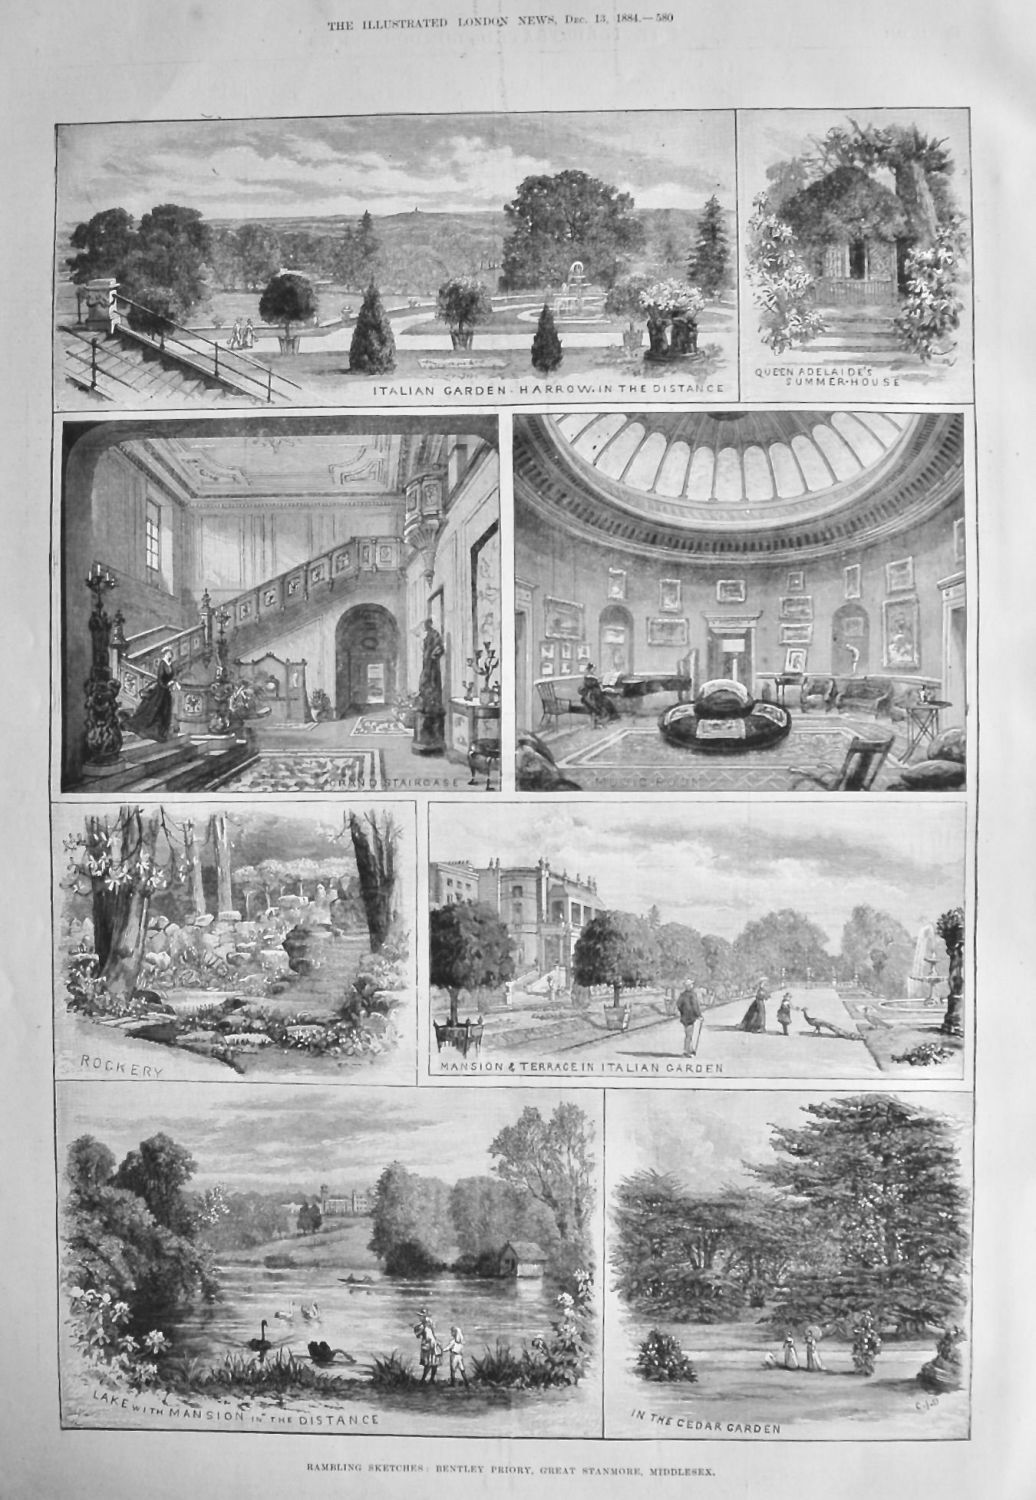 Rambling Sketches :  Bentley Priory, Great Stanmore, Middlesex.  1884.